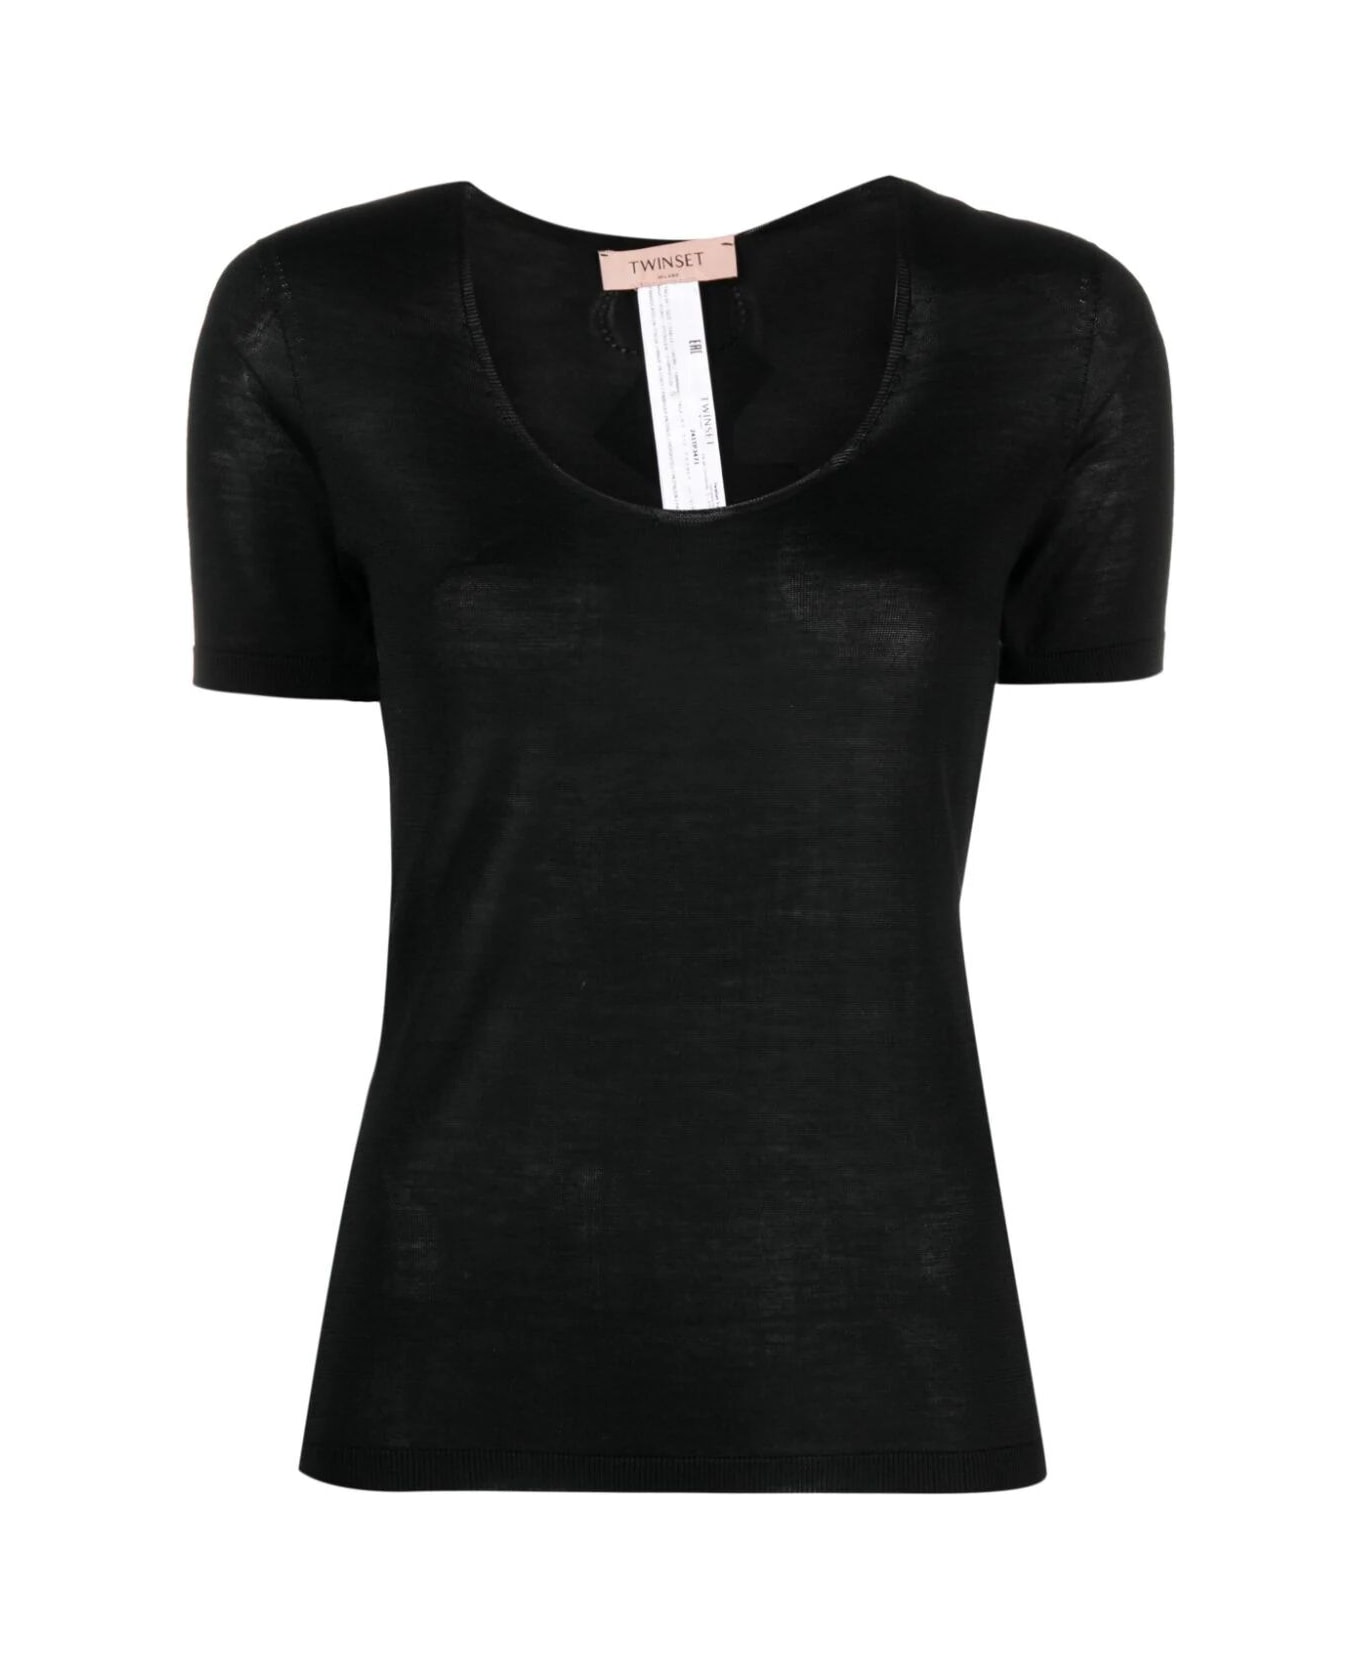 TwinSet Short Sleeves Wide Neck Sweater - Black